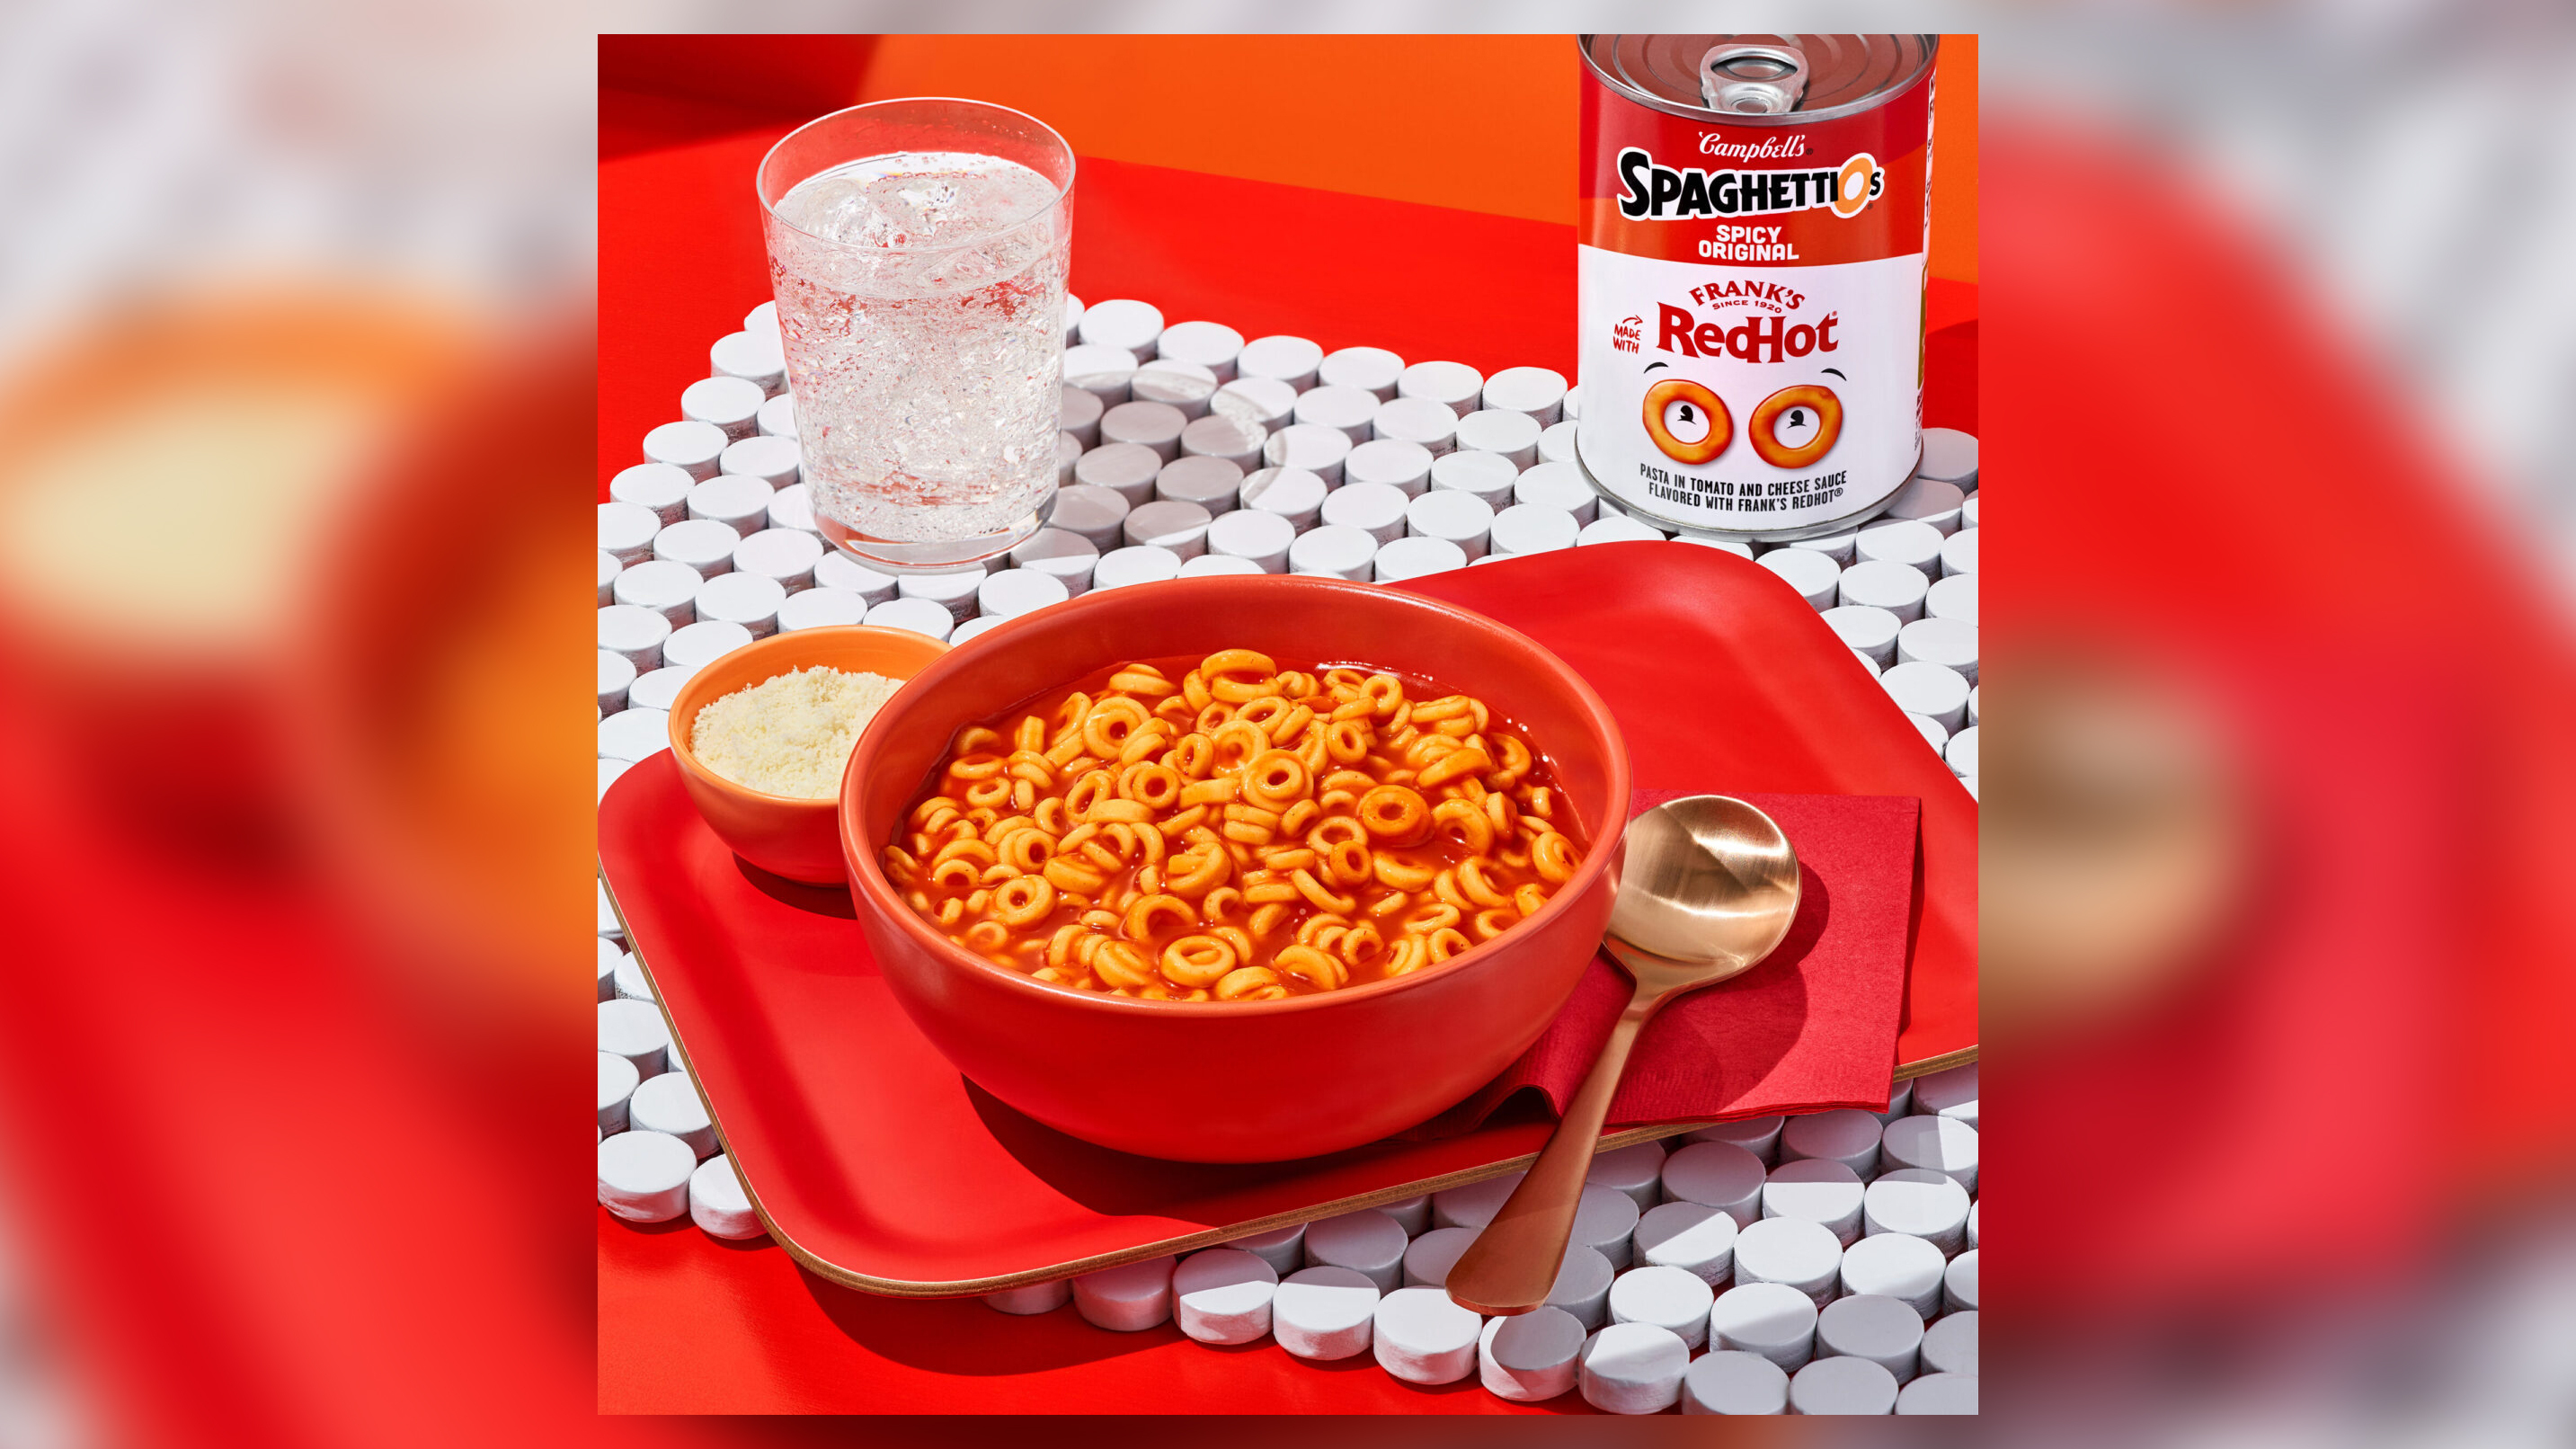 SpaghettiOs Packs on the Heat With Frank's RedHot Sauce for a